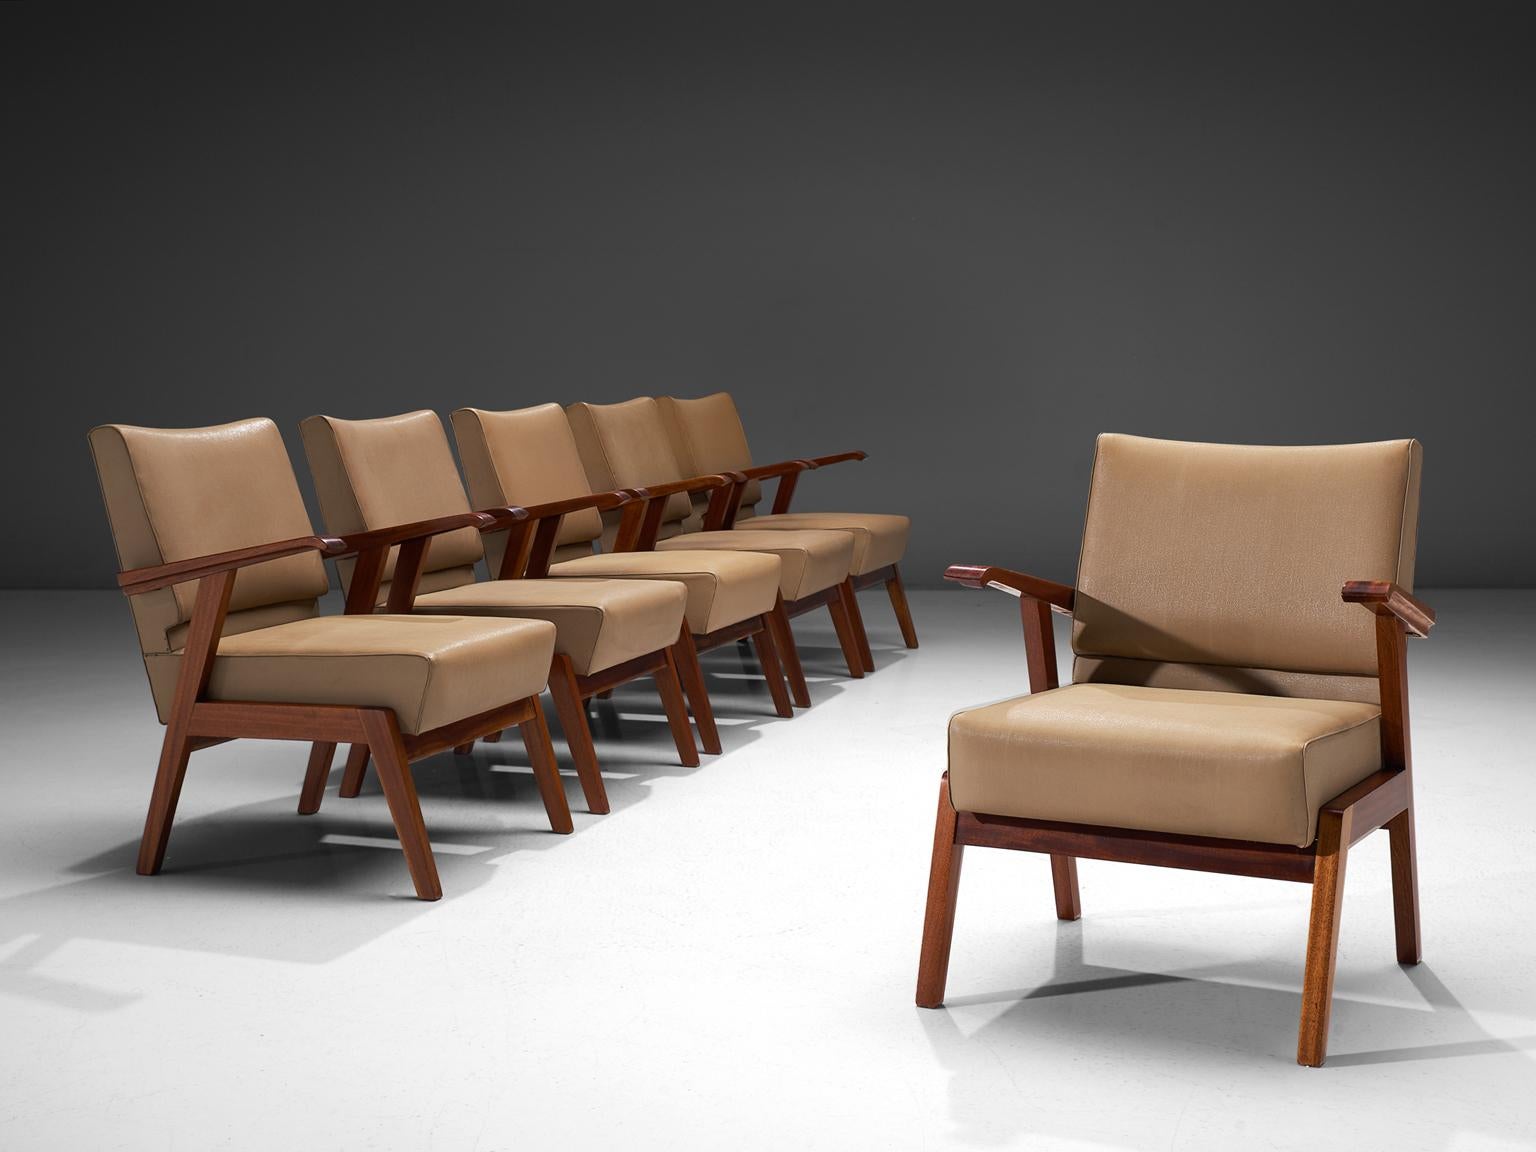 Easy chairs, in brown beige faux-leather and mahogany, Italy, 1950s. 

These mid-modern armchairs are executed in a neutral, natural beige colored leatherette. The comfortable easy chairs show voluptuous, round lines. The most iconic feature of